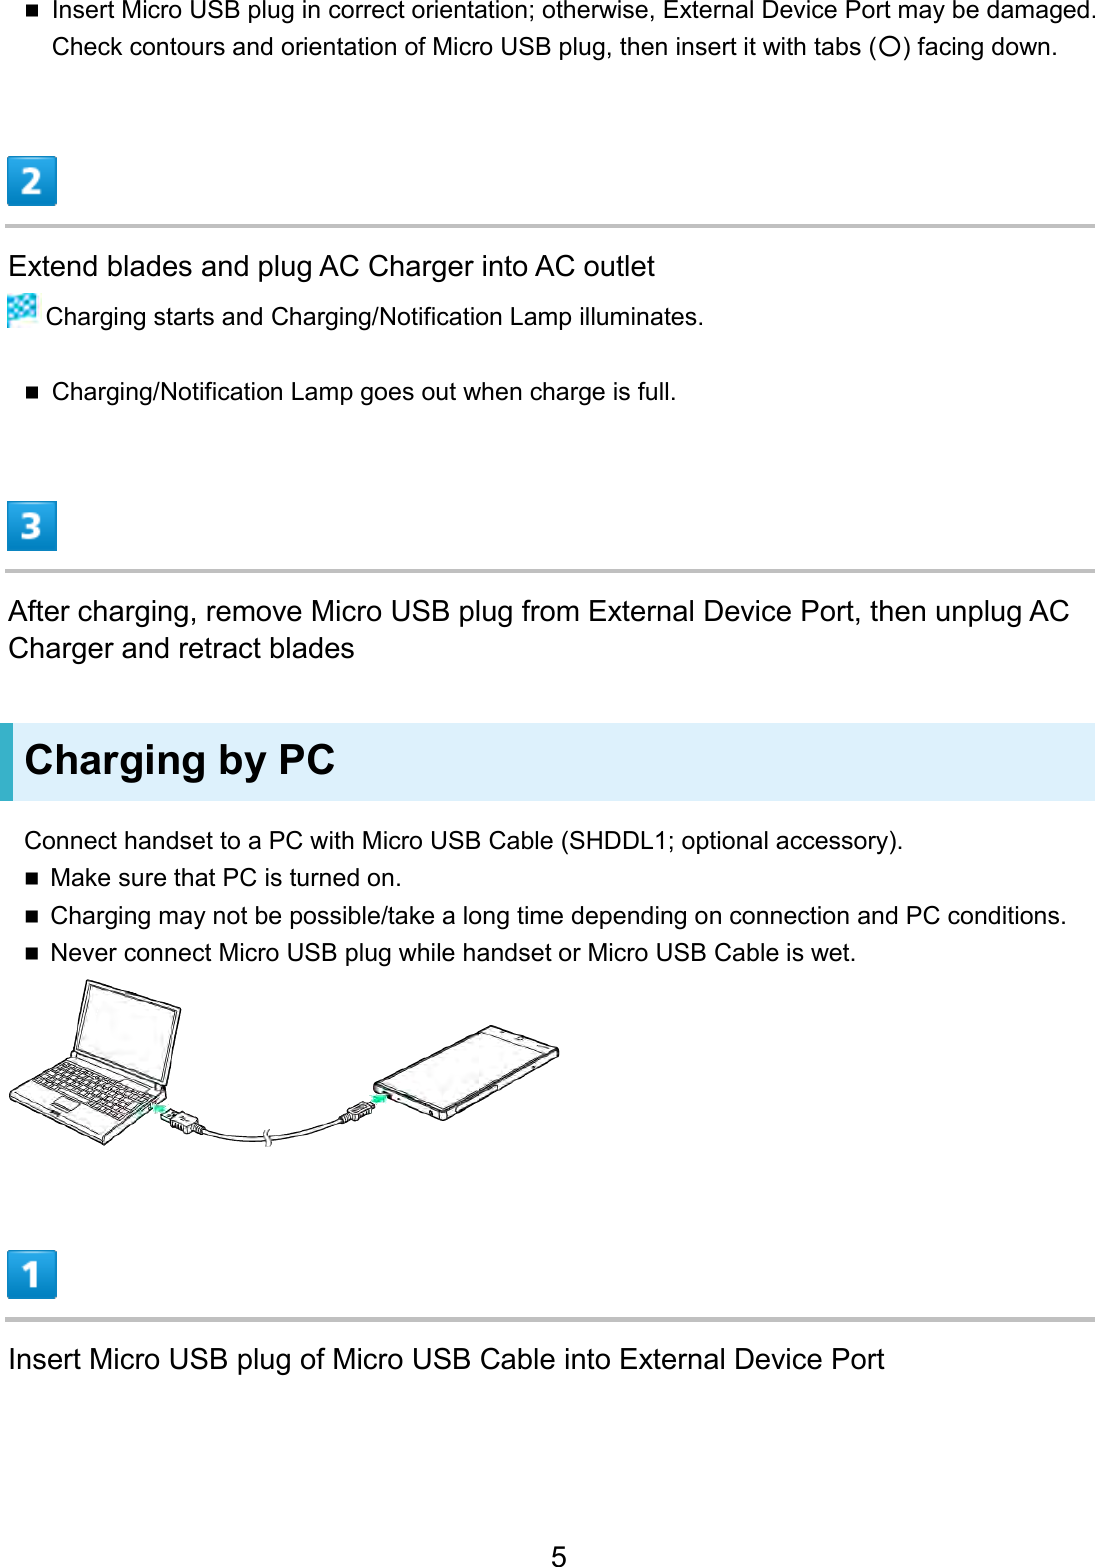 Insert Micro USB plug in correct orientation; otherwise, External Device Port may be damaged.Check contours and orientation of Micro USB plug, then insert it with tabs (○) facing down.Extend blades and plug AC Charger into AC outlet  Charging starts and Charging/Notification Lamp illuminates. Charging/Notification Lamp goes out when charge is full.After charging, remove Micro USB plug from External Device Port, then unplug AC Charger and retract blades Charging by PC Connect handset to a PC with Micro USB Cable (SHDDL1; optional accessory). Make sure that PC is turned on.Charging may not be possible/take a long time depending on connection and PC conditions.Never connect Micro USB plug while handset or Micro USB Cable is wet.Insert Micro USB plug of Micro USB Cable into External Device Port 5